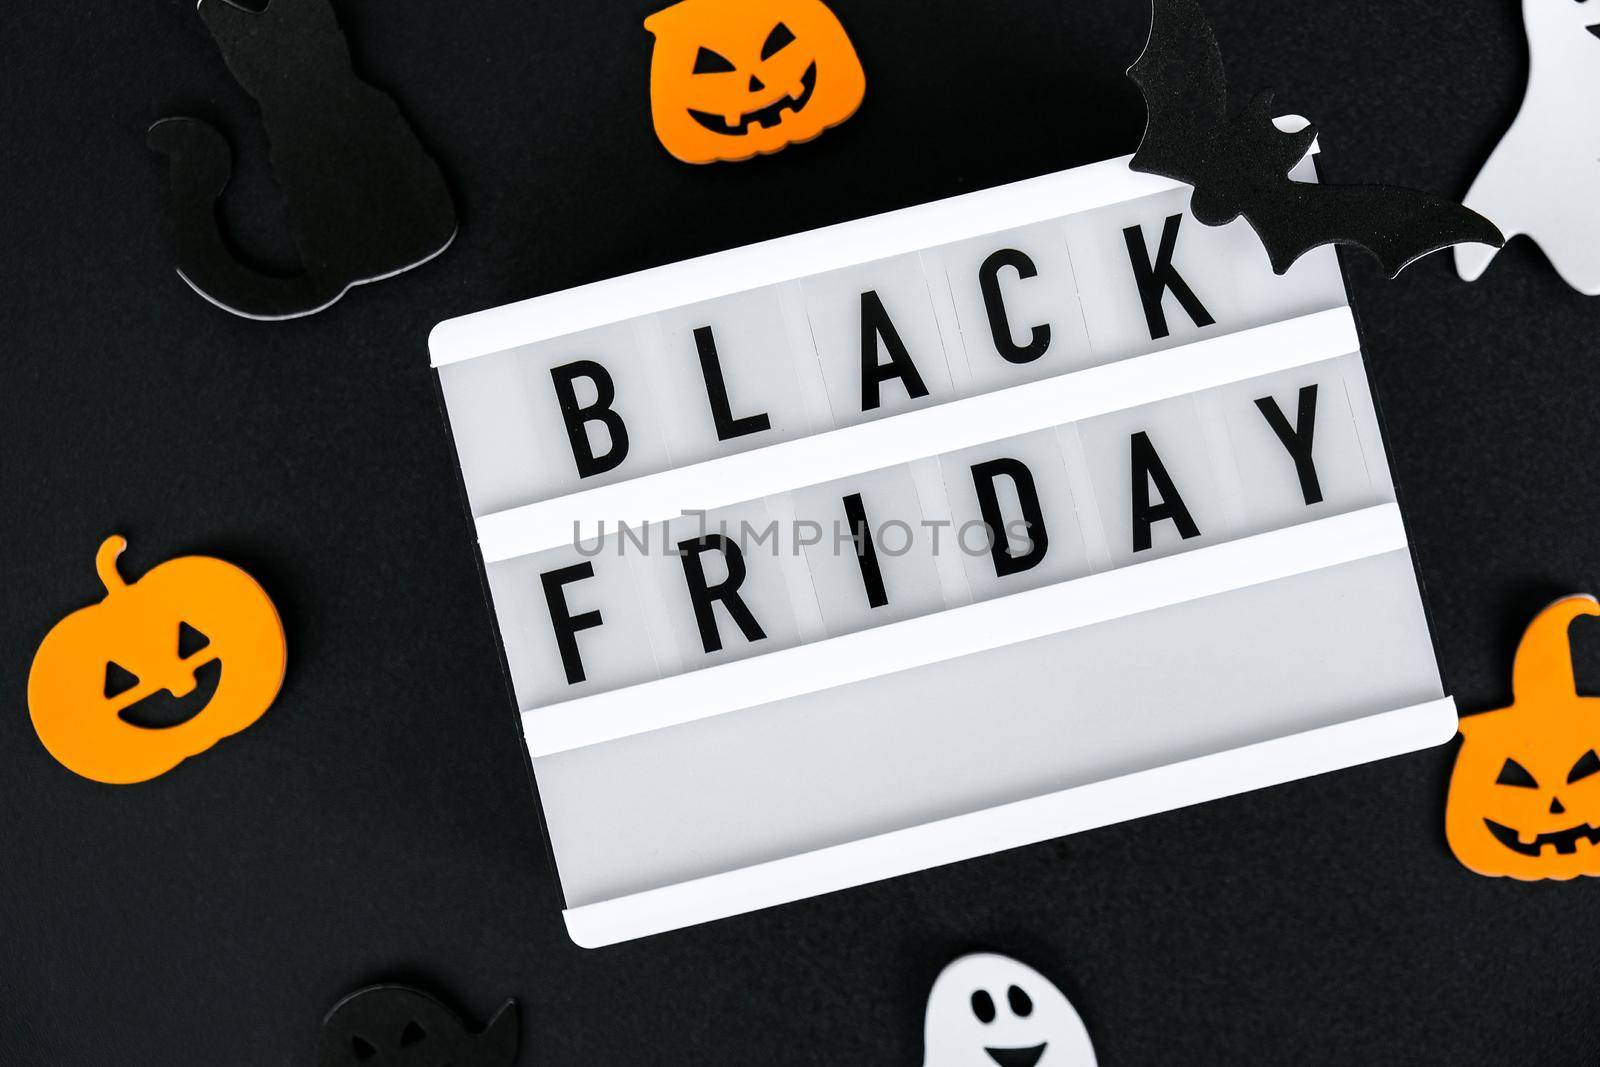 Lightbox with text BLACK FRIDAY, Halloween decorations Sale shopping concept. Online shopping Template Black friday sale mockup fall thanksgiving promotion advertising Big sale. Cyber monday. Holiday